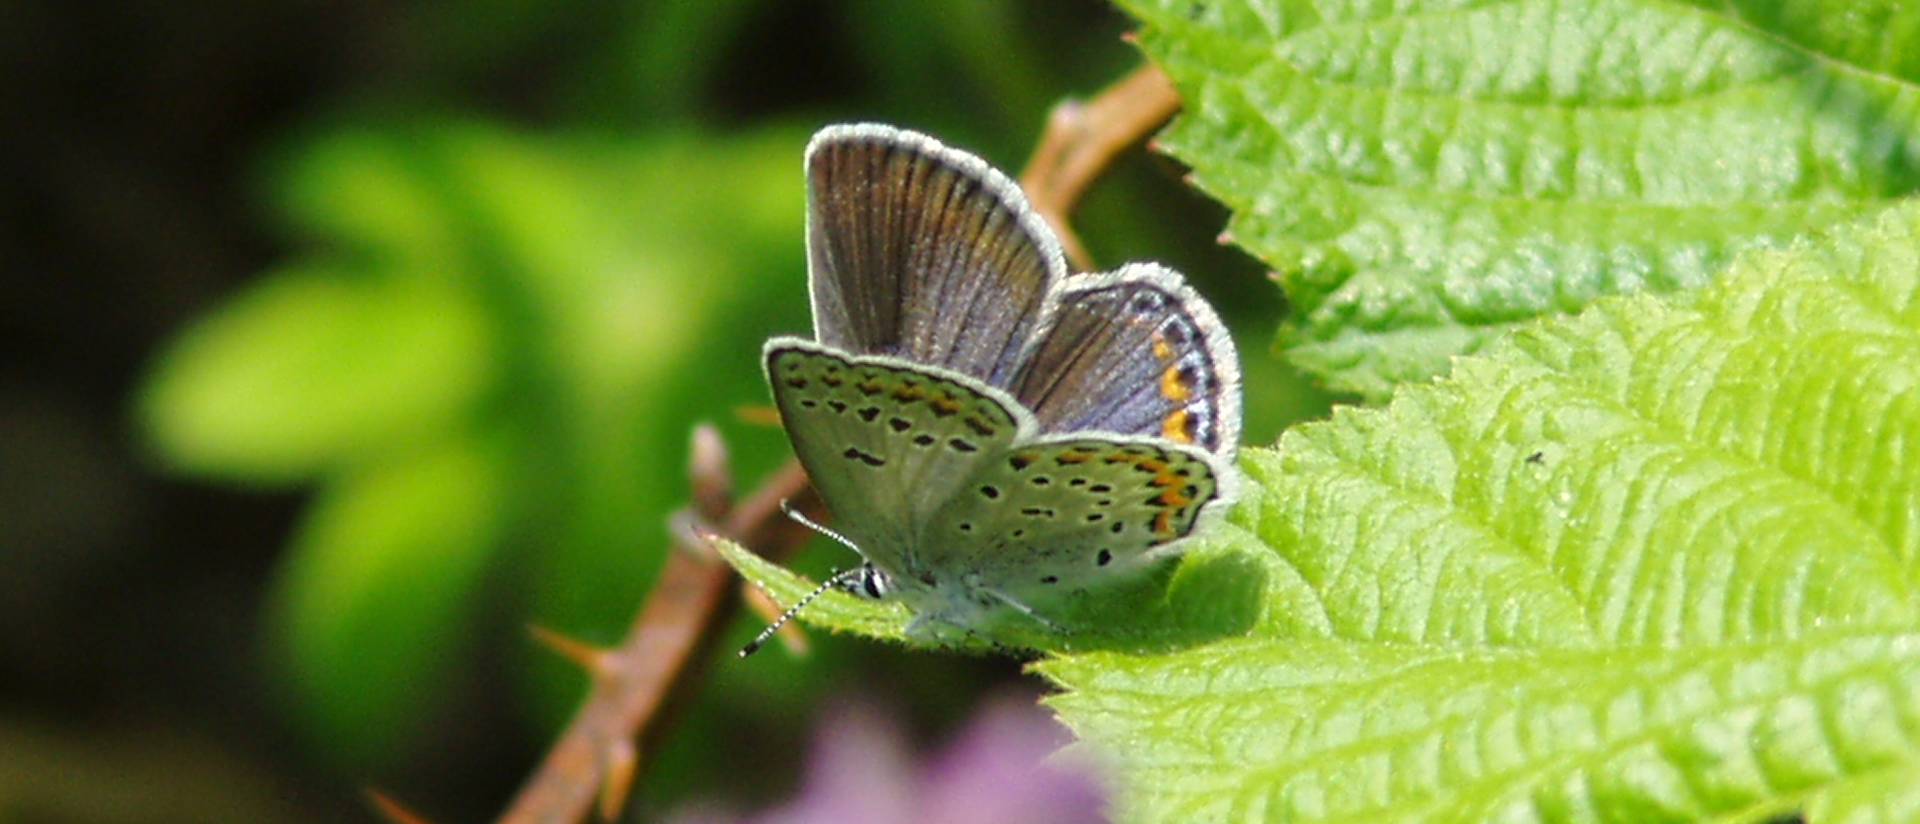 The Karner blue butterfly is a federally listed endangered species and is classified as a Species of Special Concern by the Wisconsin DNR. During the last 20 years, Karner populations have declined, primarily due to loss of habitat.